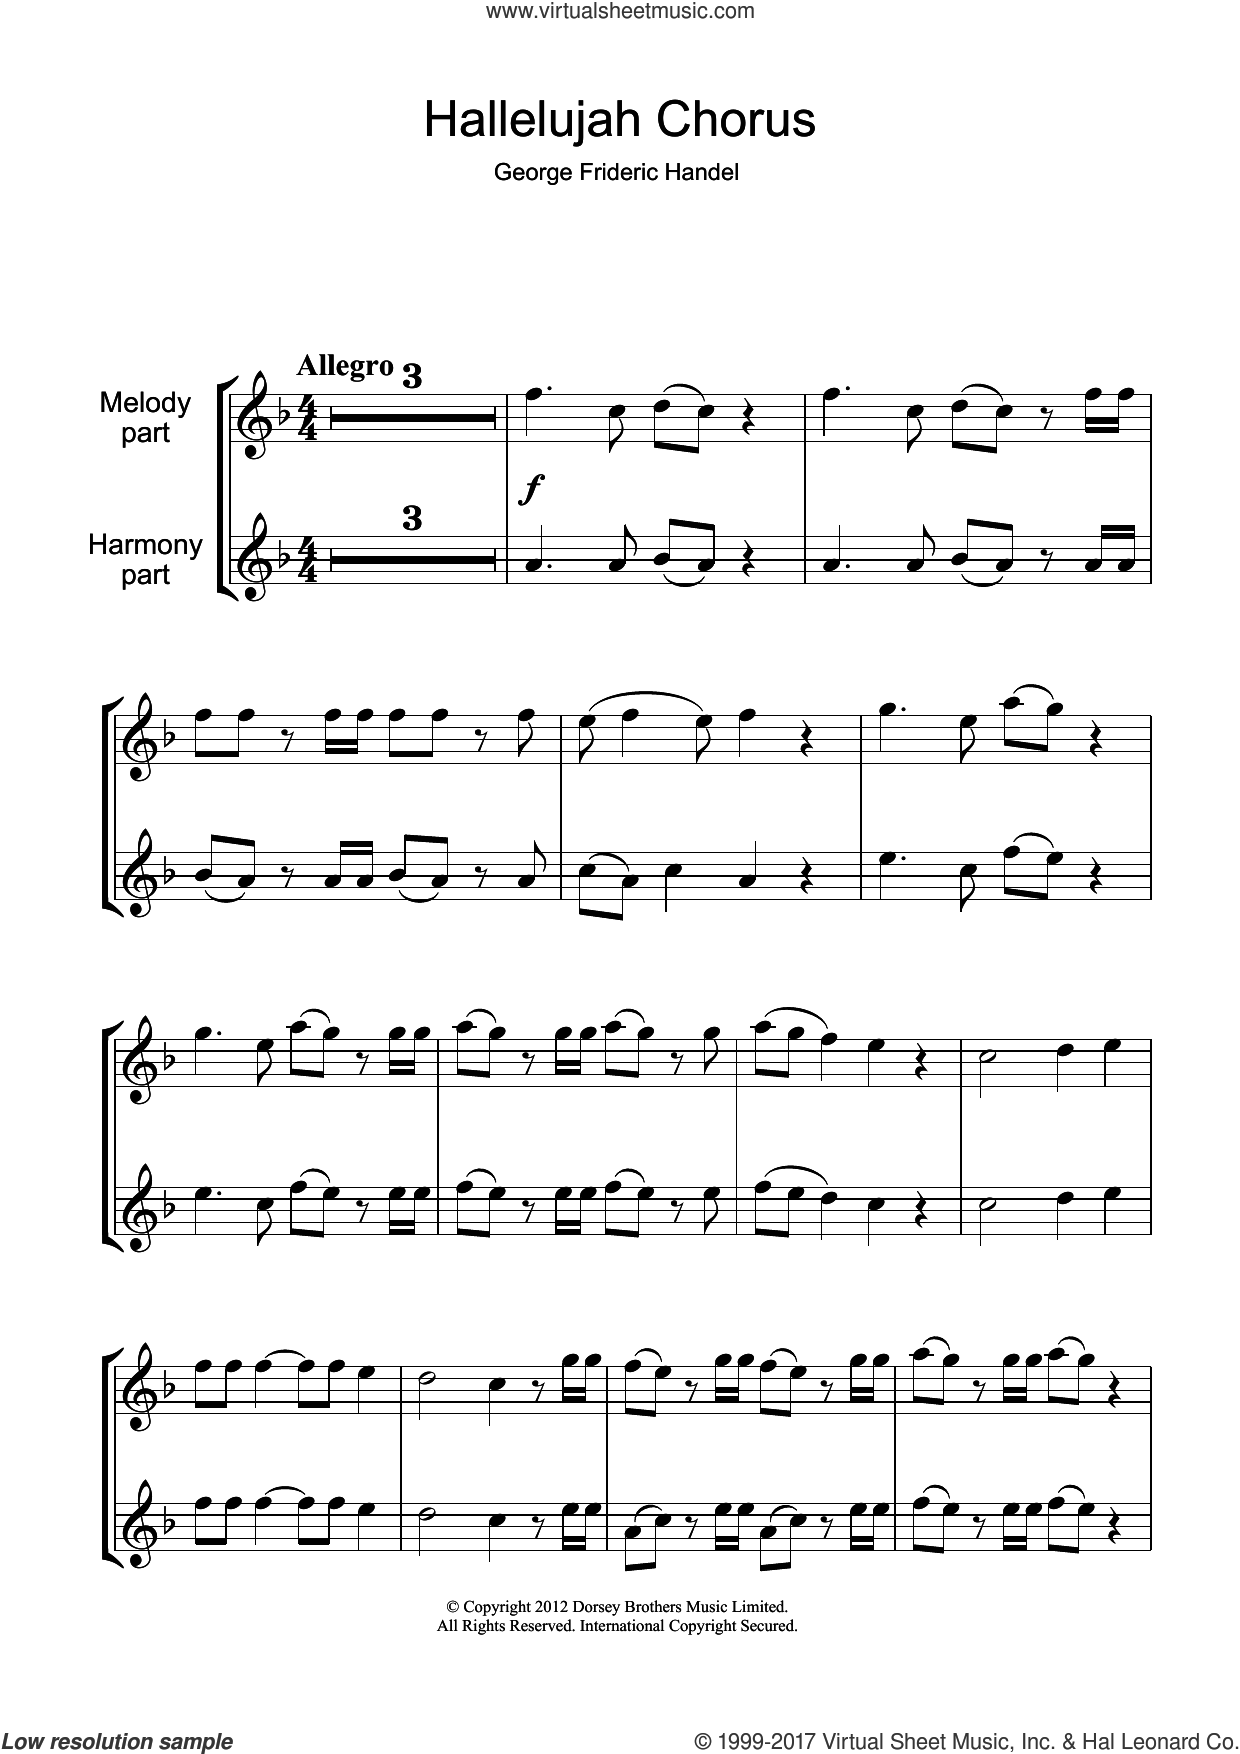 Handel - Hallelujah Chorus (from The Messiah) sheet music for flute solo